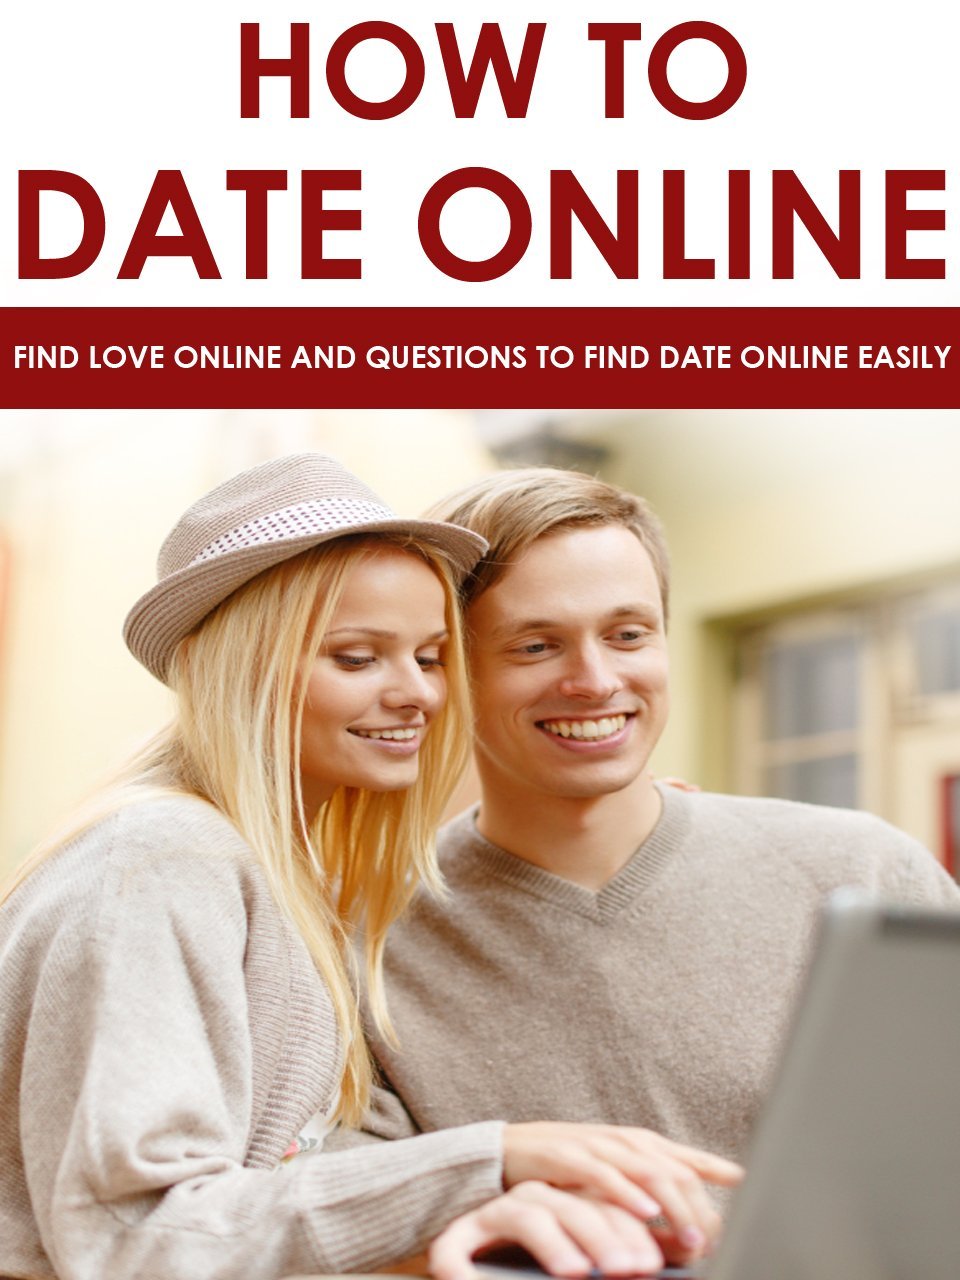 How To Date Online – Find Love Online and Questions To Find Date Online Easily by Jolin White